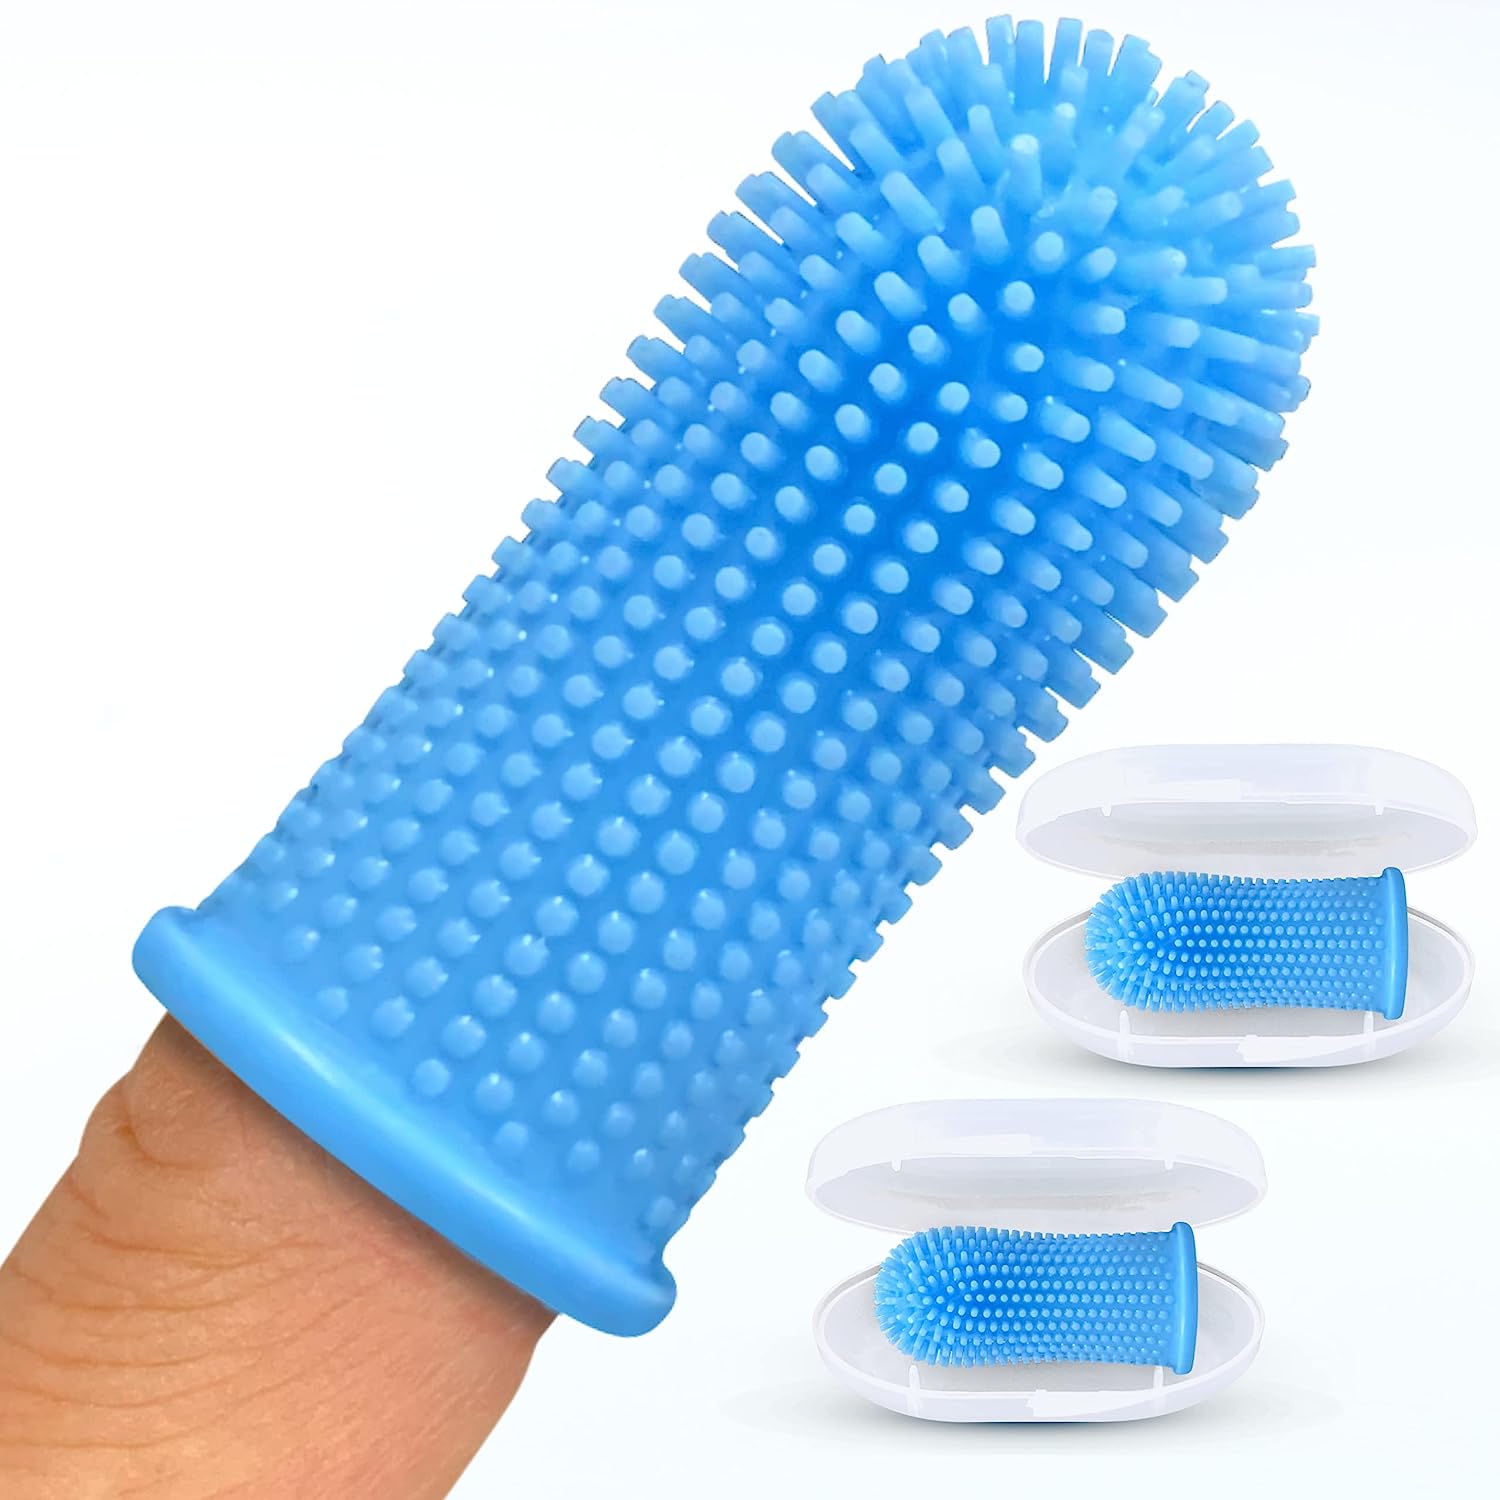 Dog toothbrush-360° dog brushing kit for dog teeth cleaning-dog dental care suitable for puppies, cats and small pets-Ergonomic dog finger toothbrush with surround bristles-blue 4 pieces